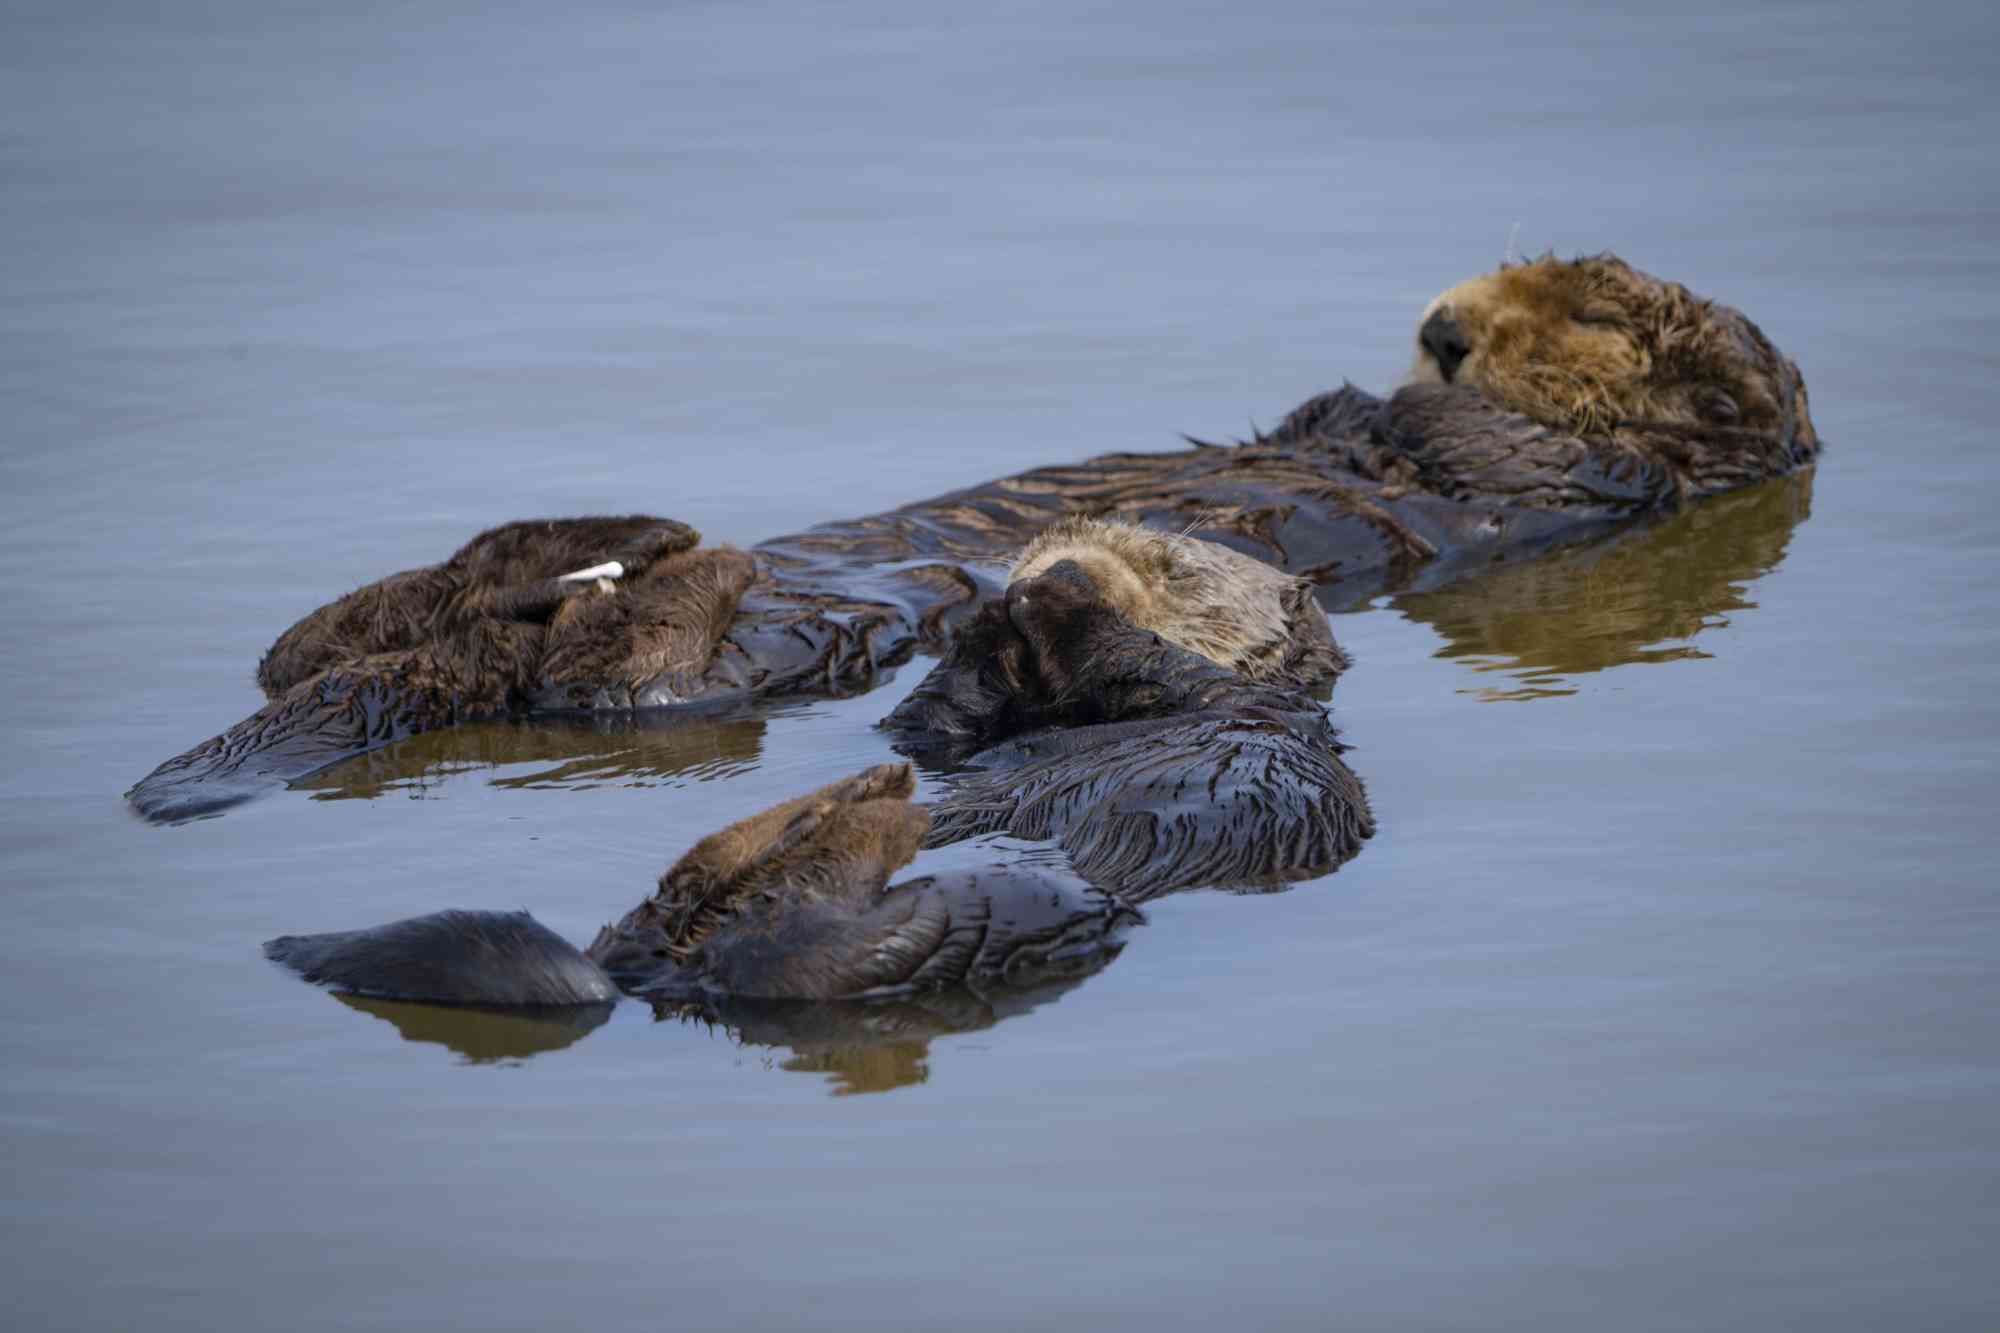 Southern Sea Otters